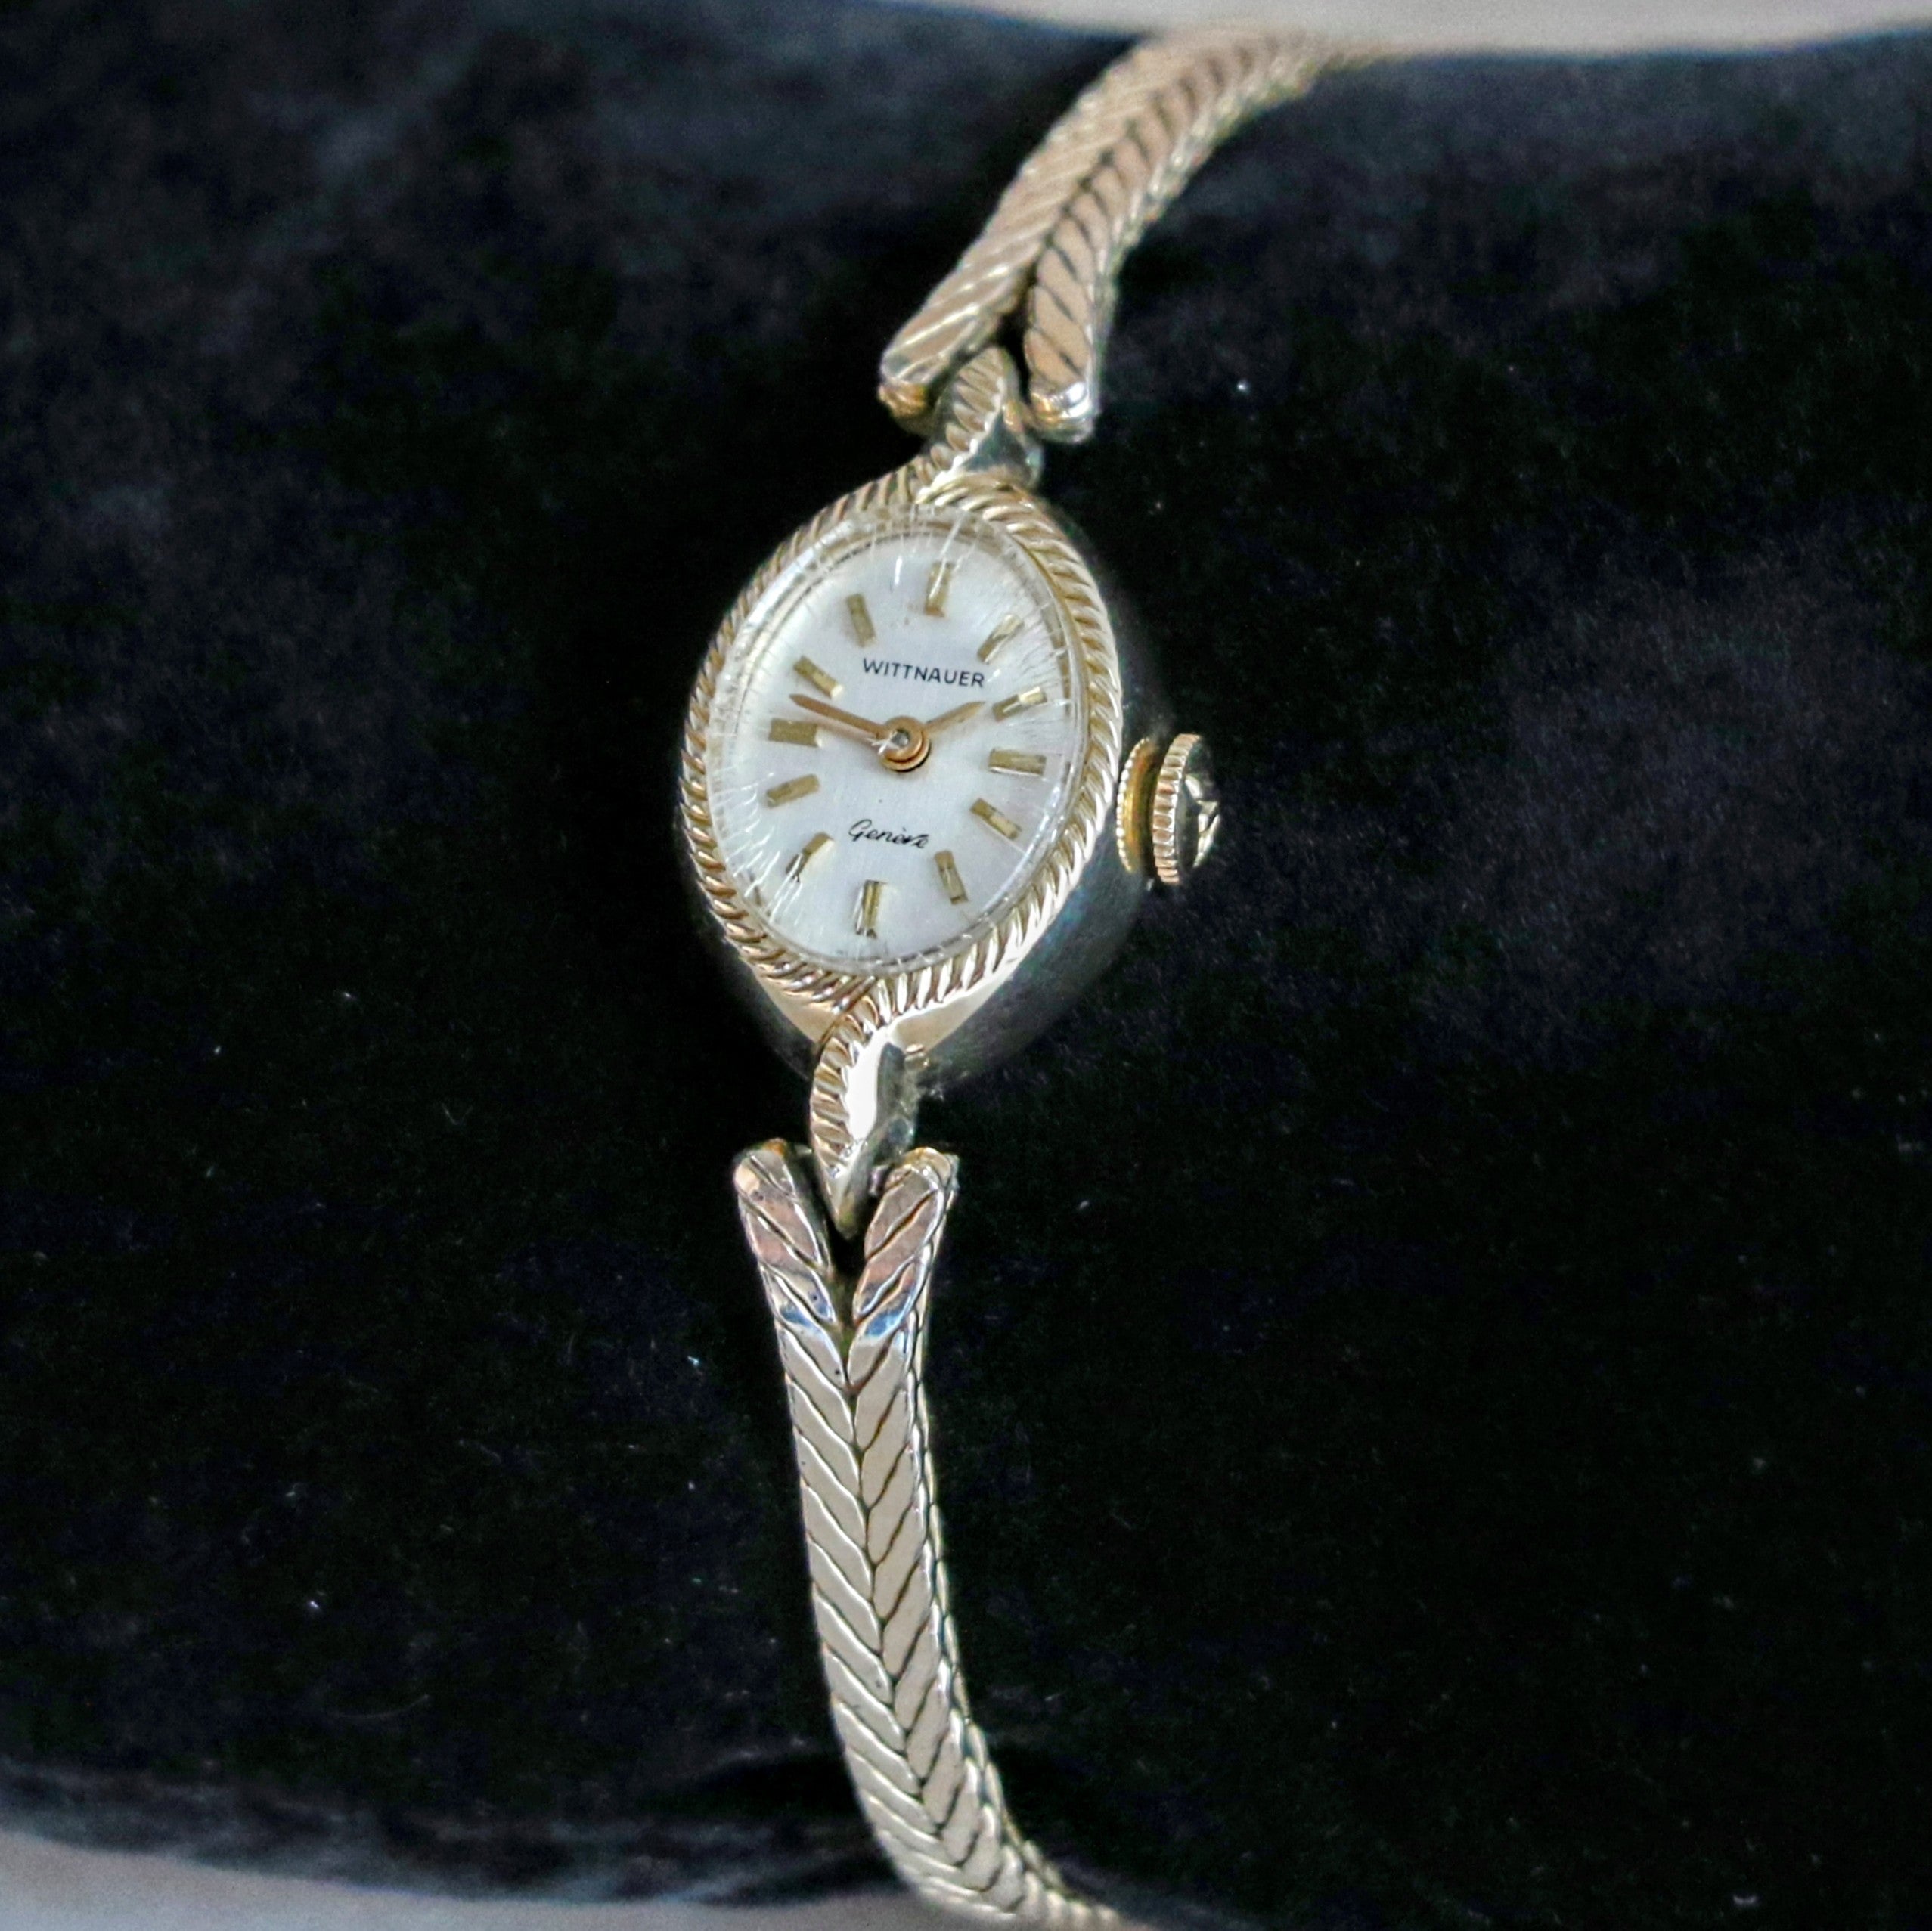 WITTNAUER GENEVE Ladies Watch Cal. 5D-5 17 Jewels Swiss Made Vintage Wristwatch